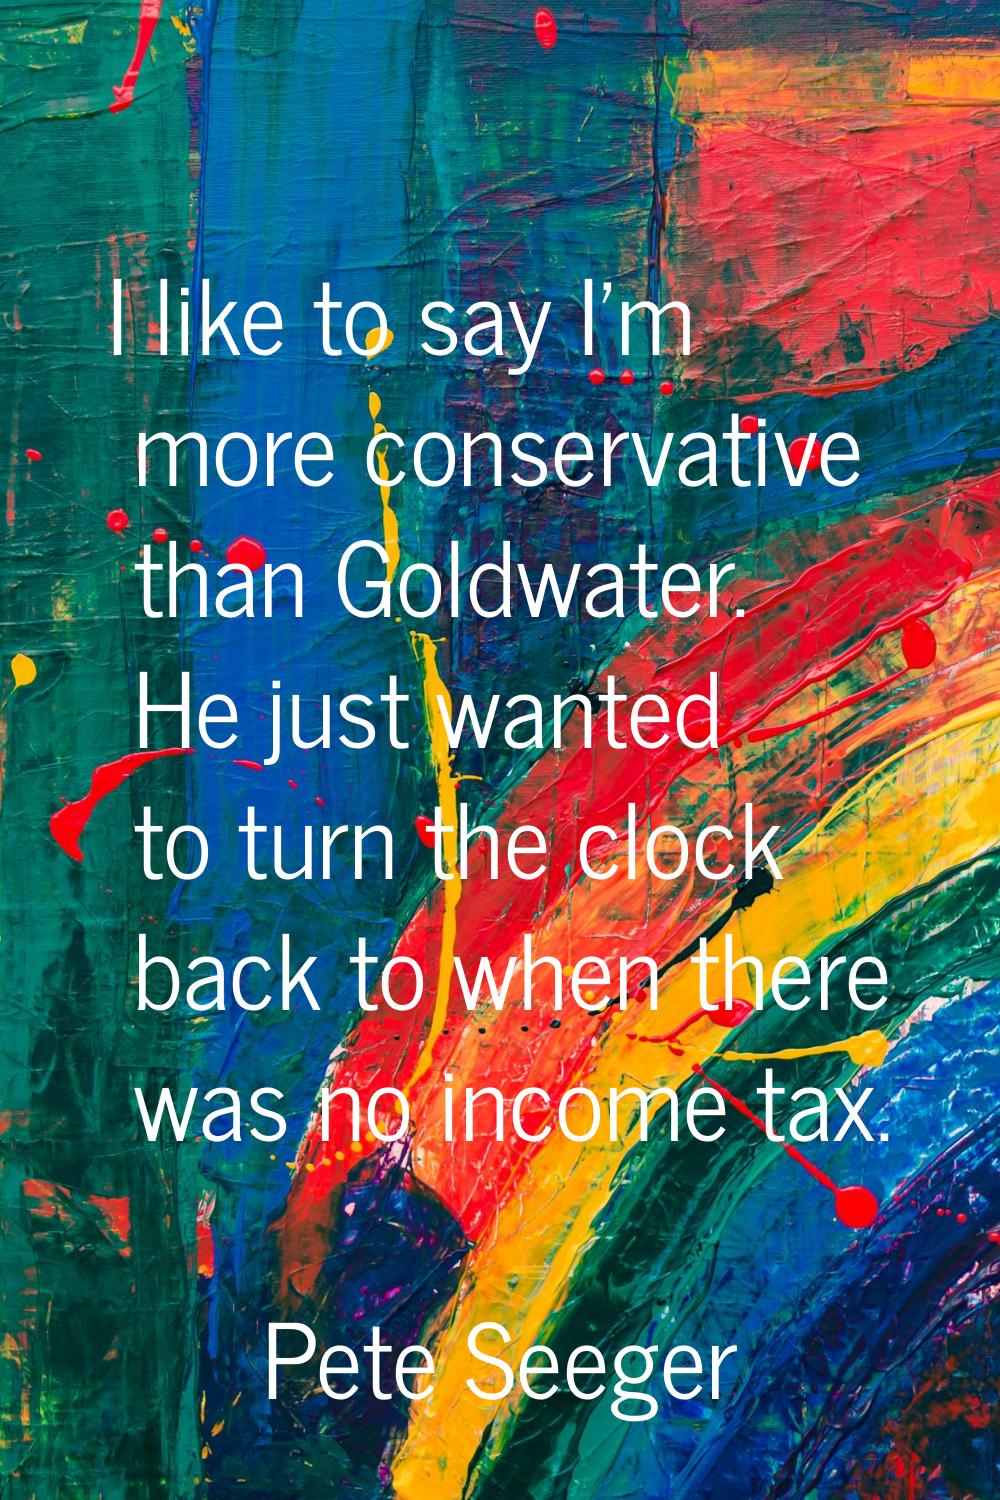 I like to say I'm more conservative than Goldwater. He just wanted to turn the clock back to when t